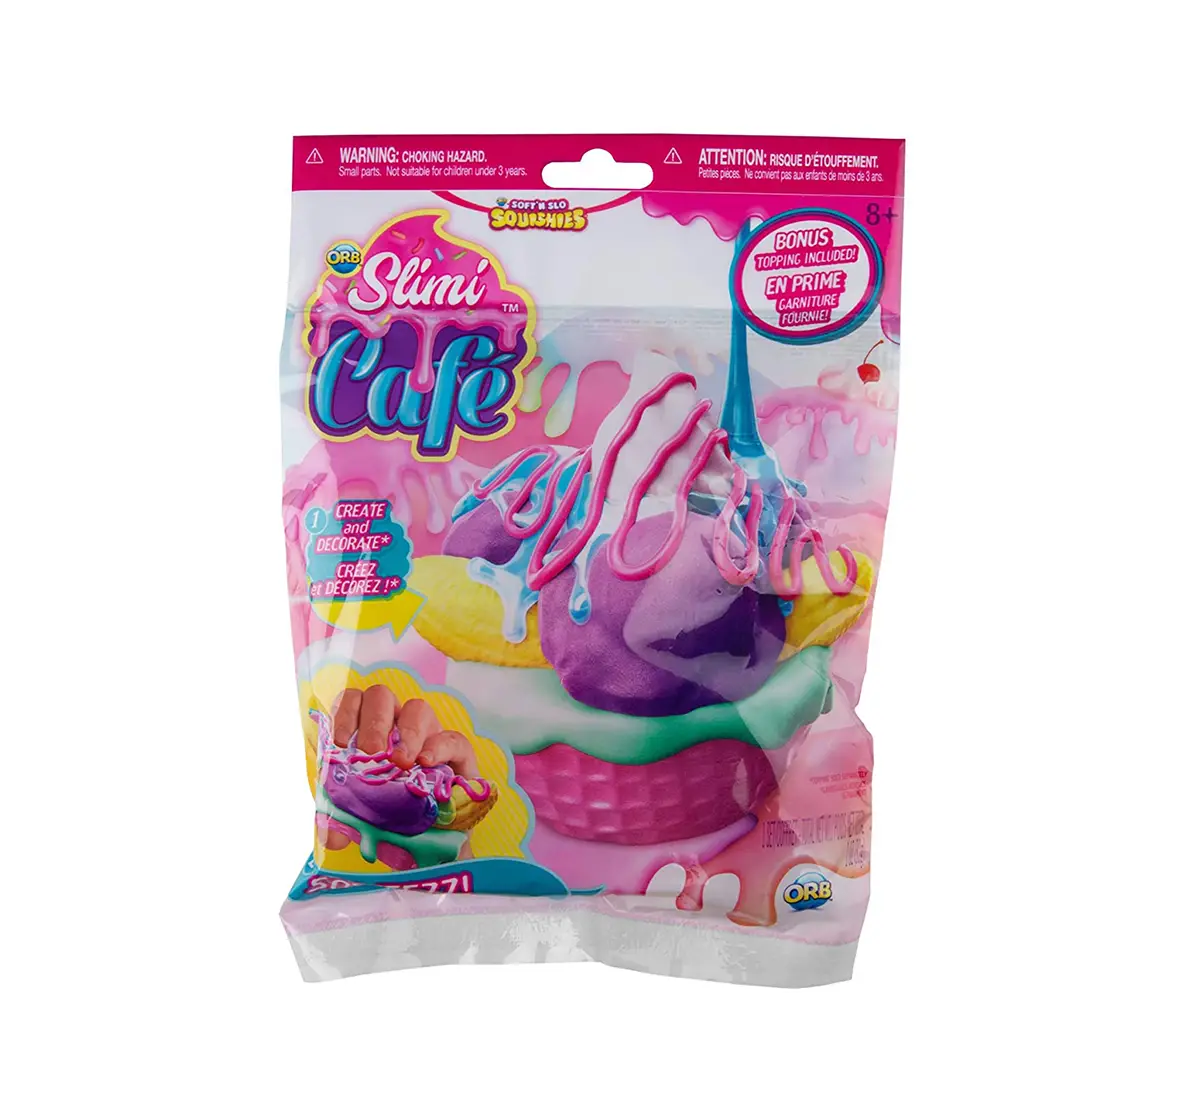 Slimi Cafe Orb  Squishies Assorted Sand, Slime & Others for Kids age 5Y+ 